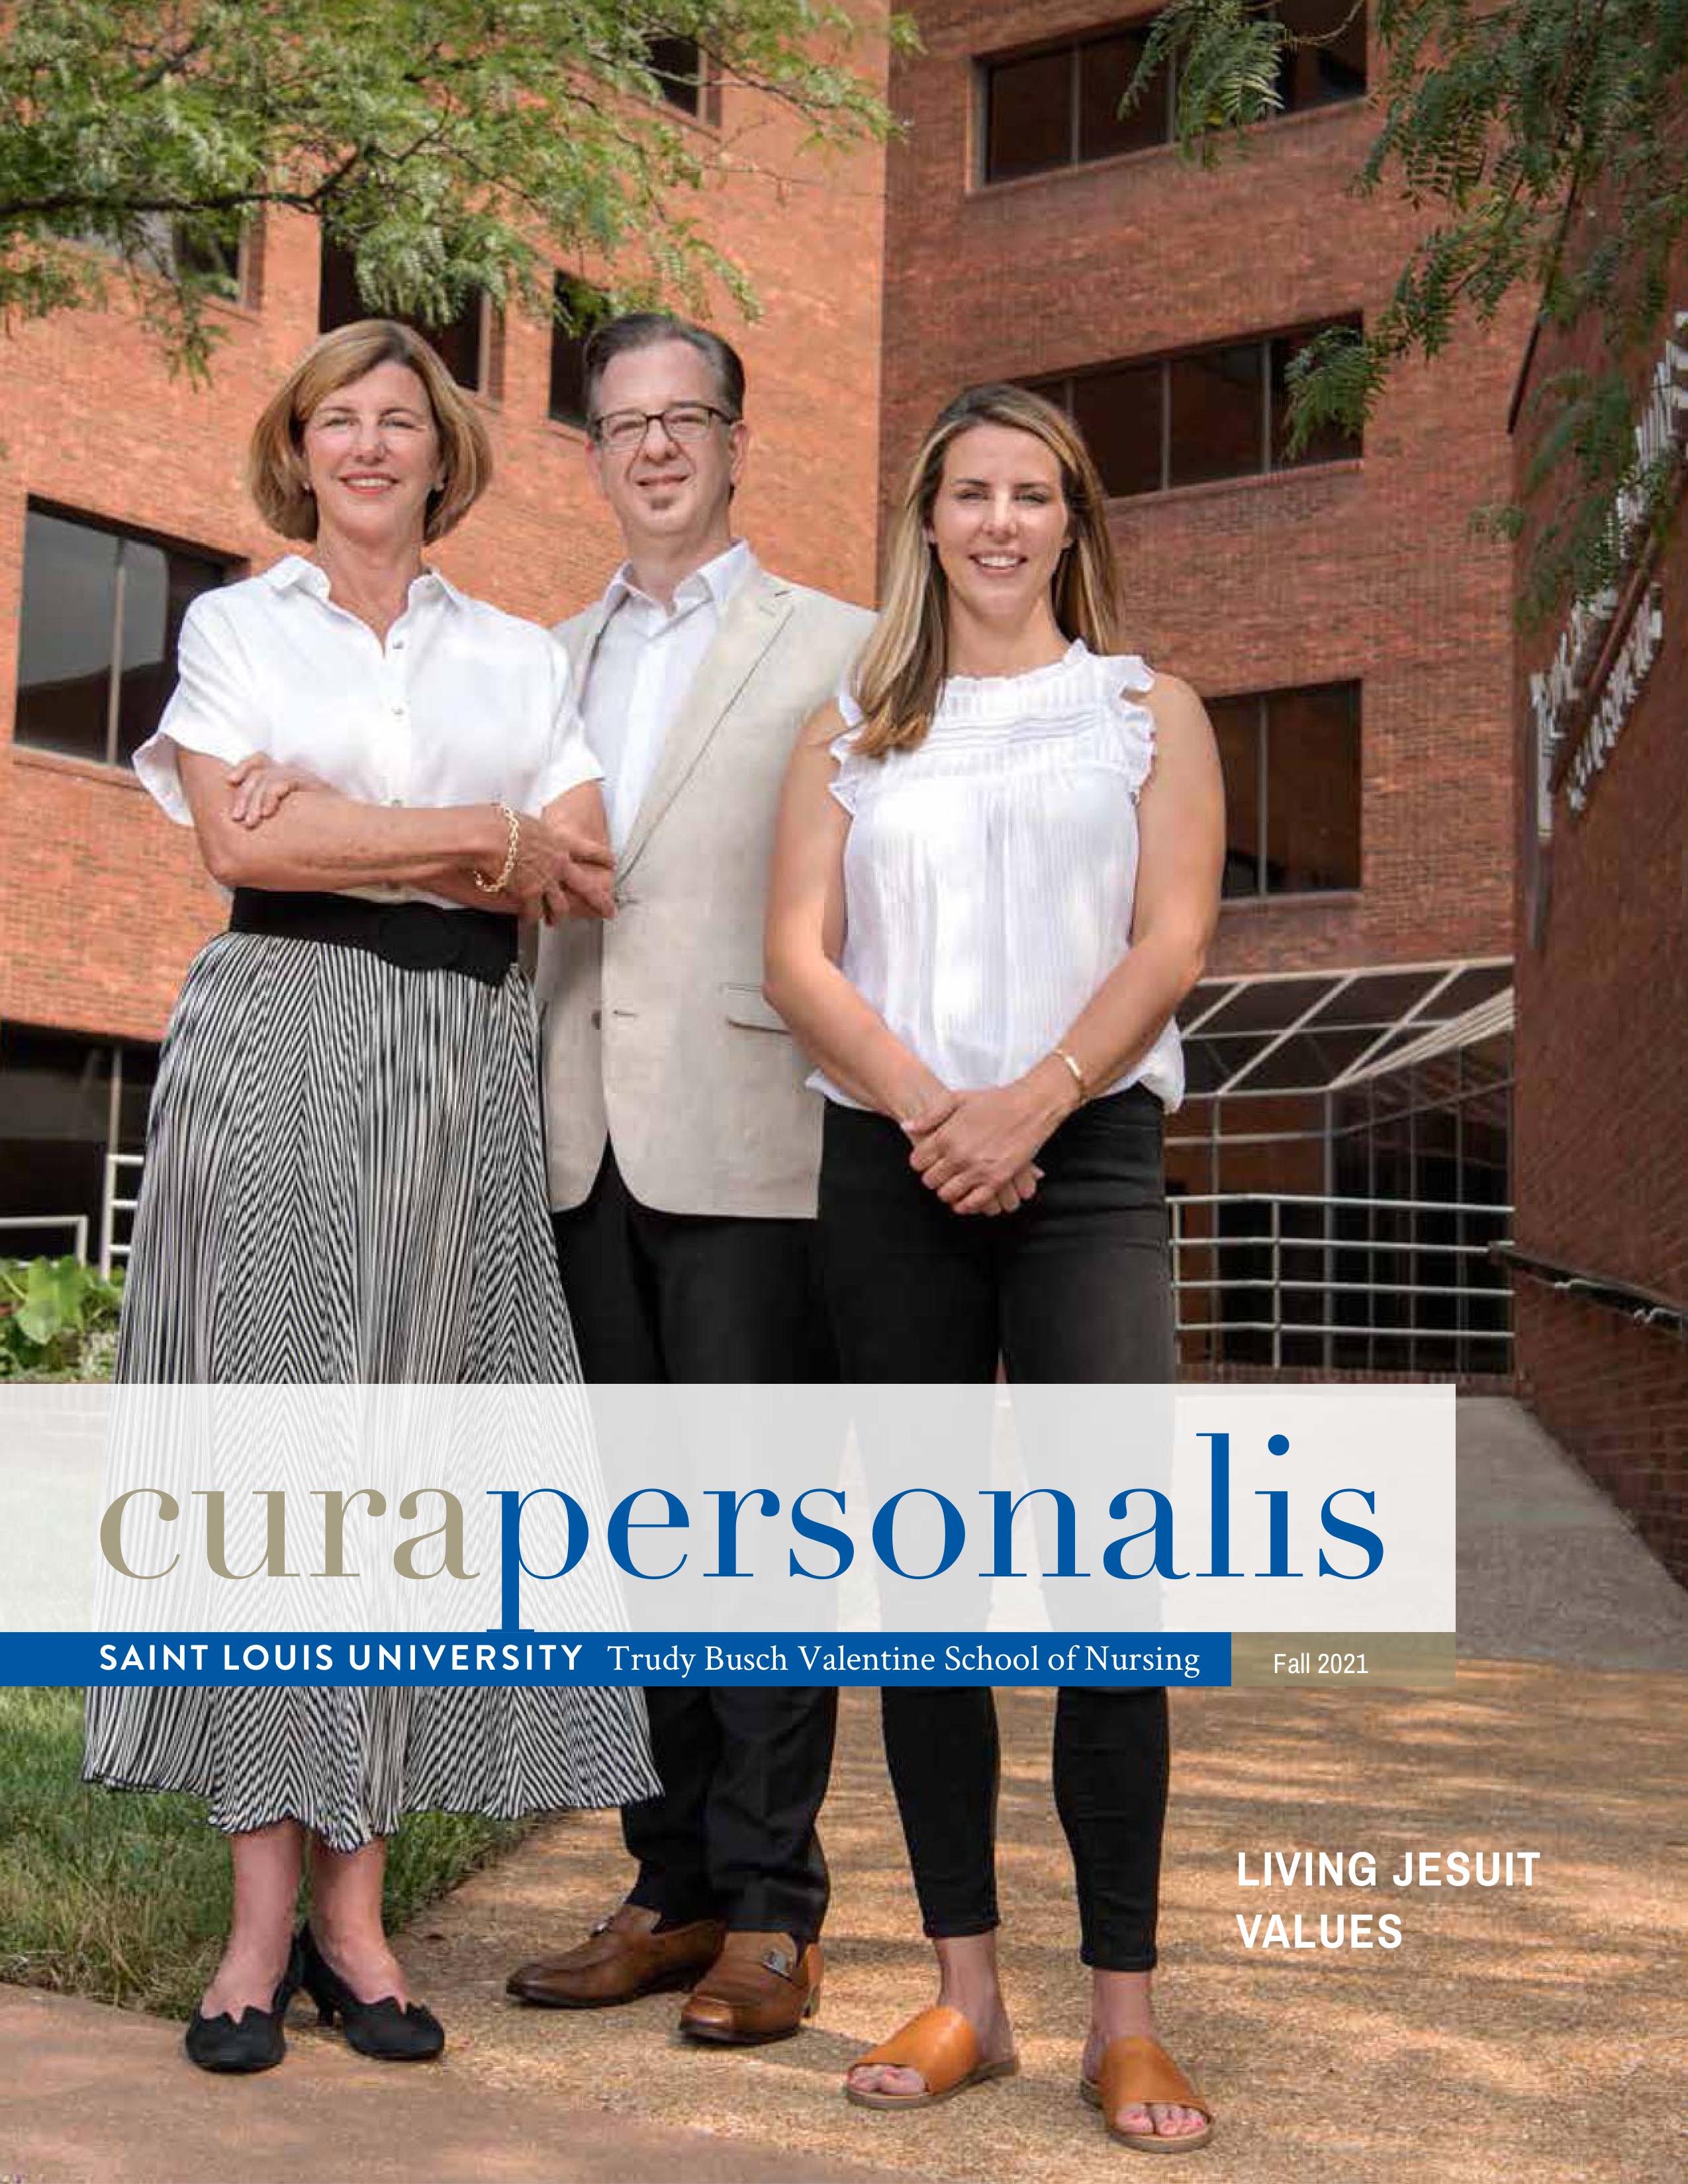 The 2018 cover of cura personlis showing a three people posed outside the nursing school